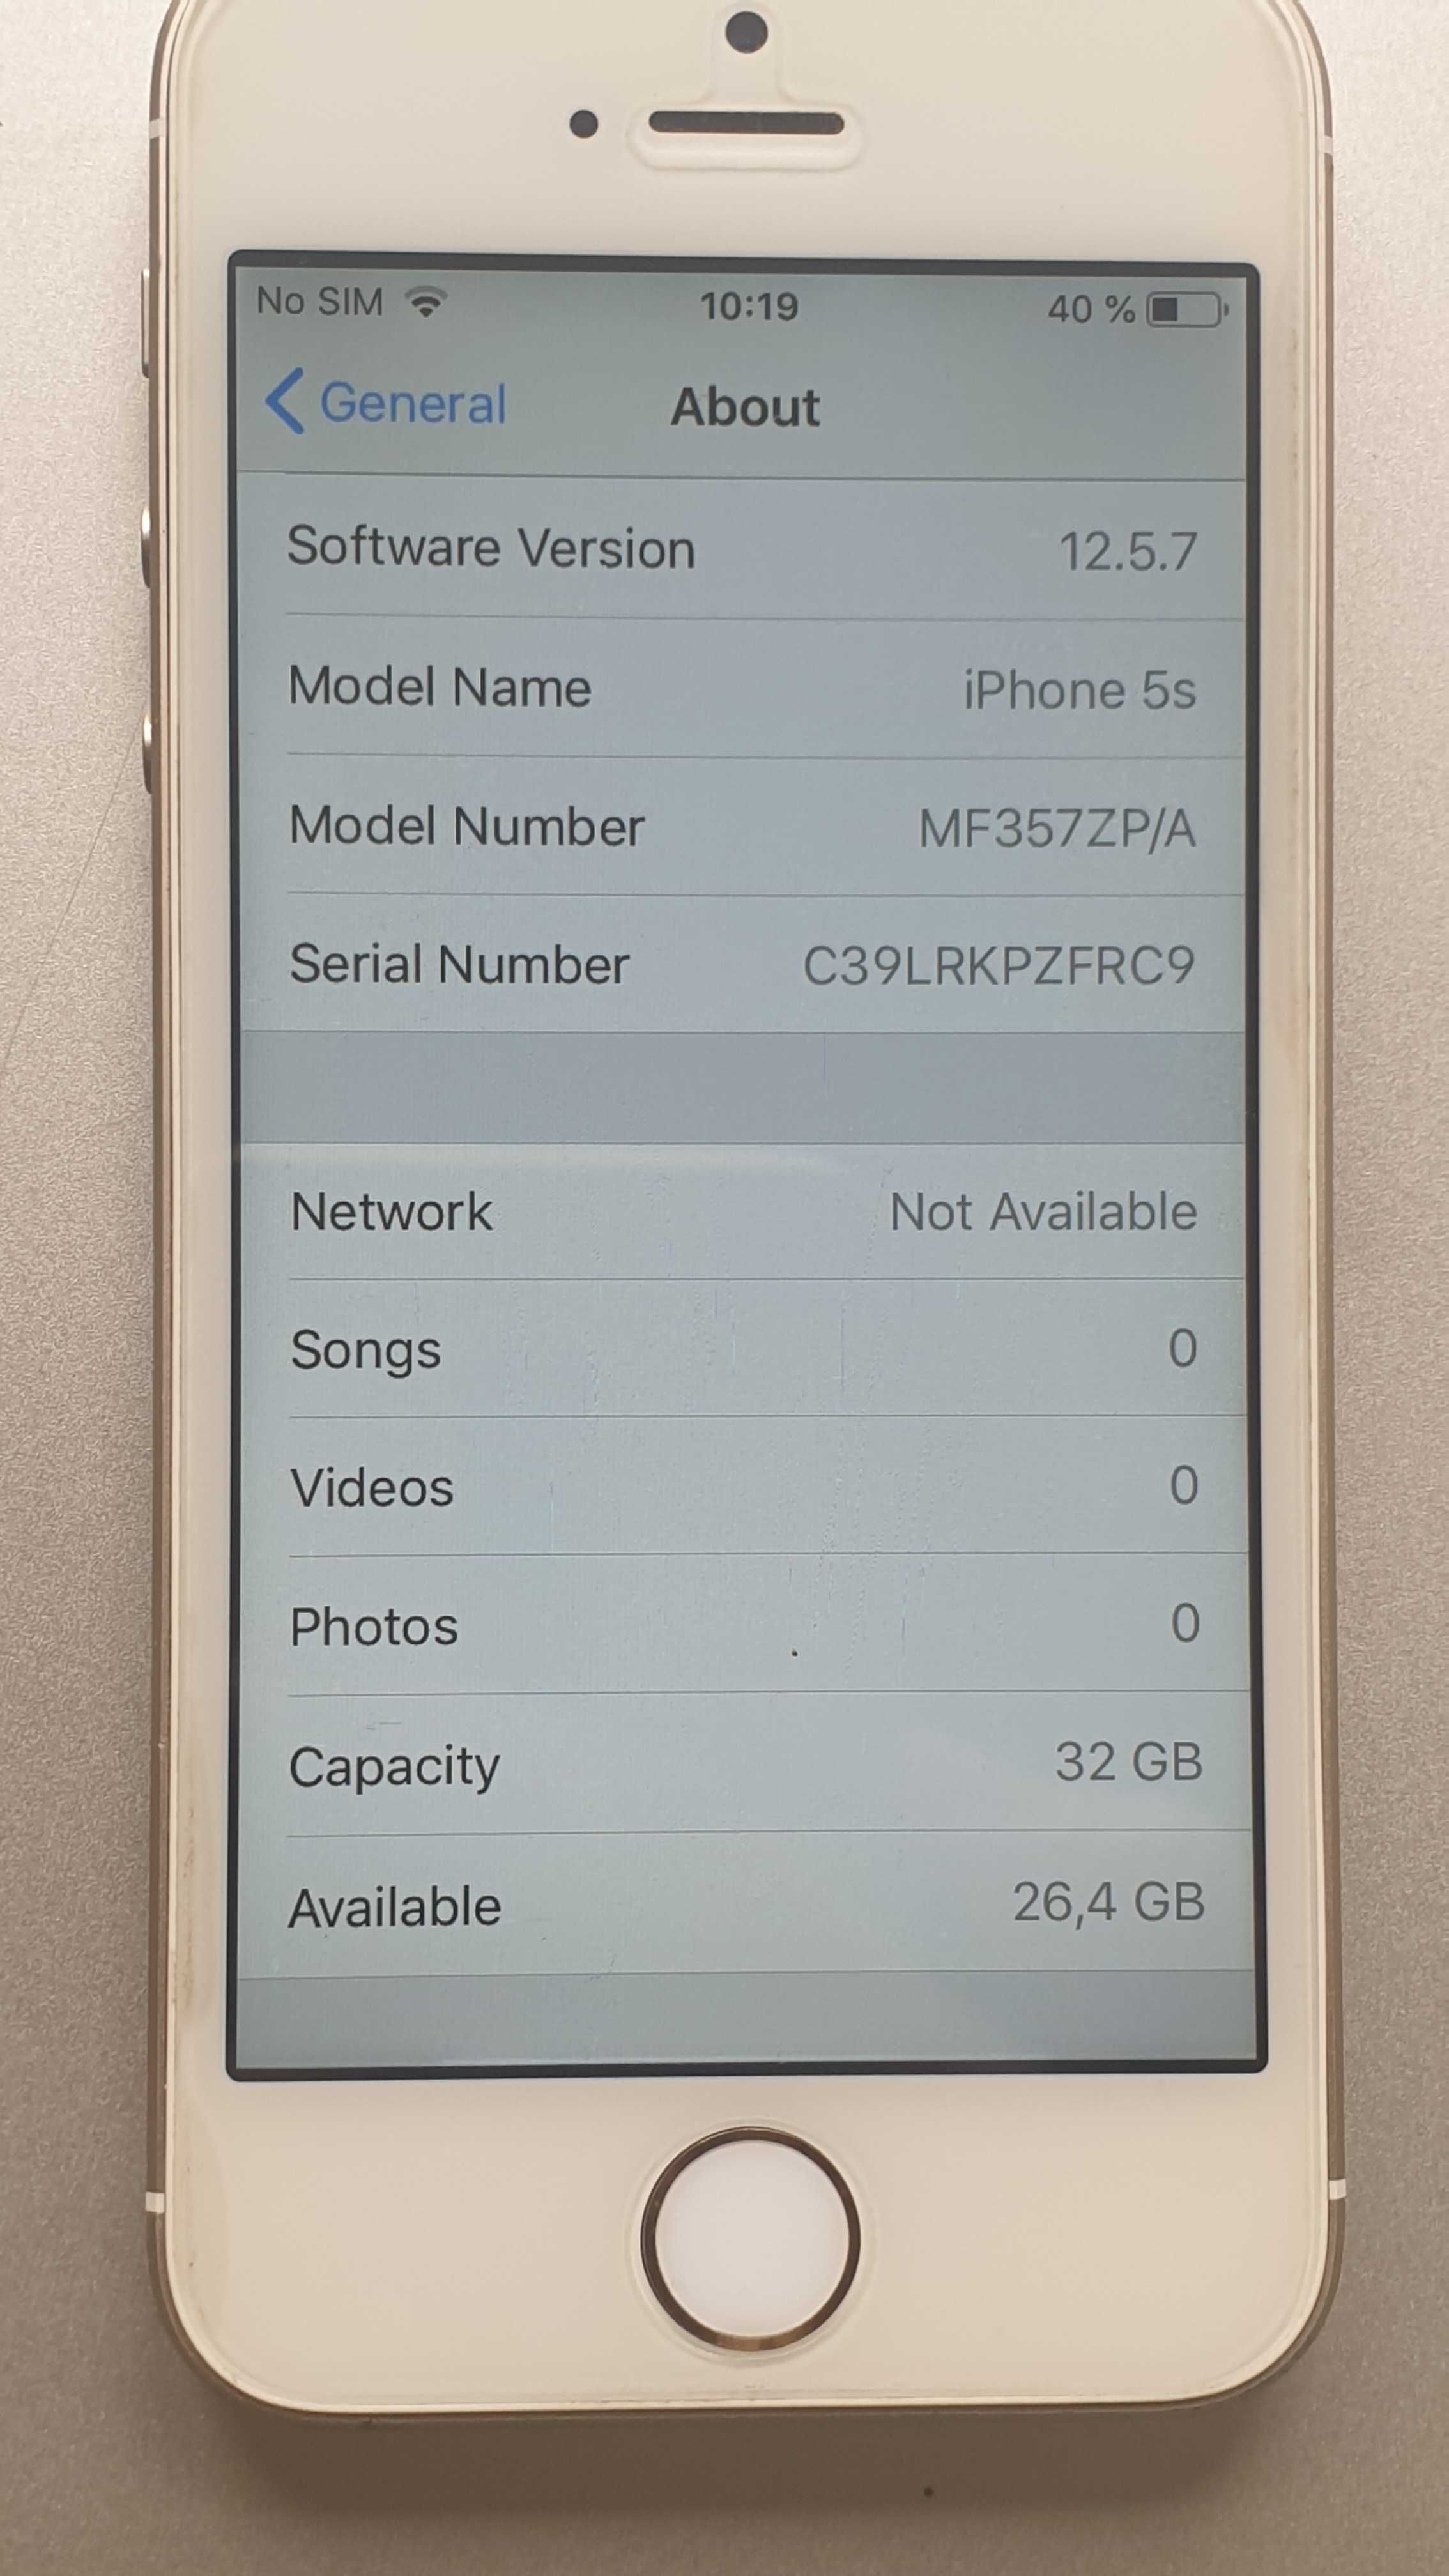 Apple iPhone 5s, model A1530, 4G